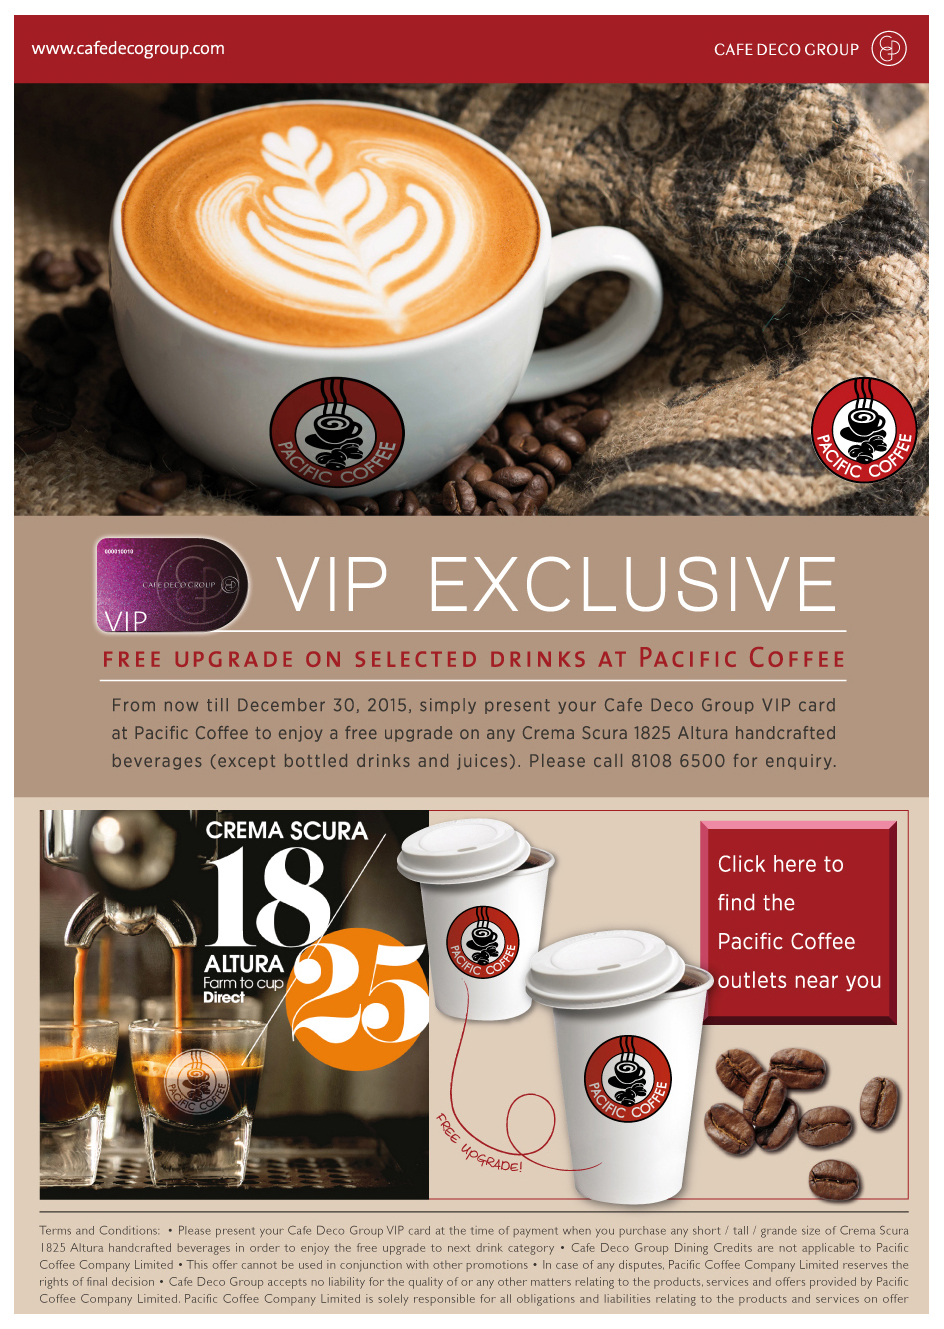 Pacific Coffee and Cafe Deco Group VIP Joint Promotion